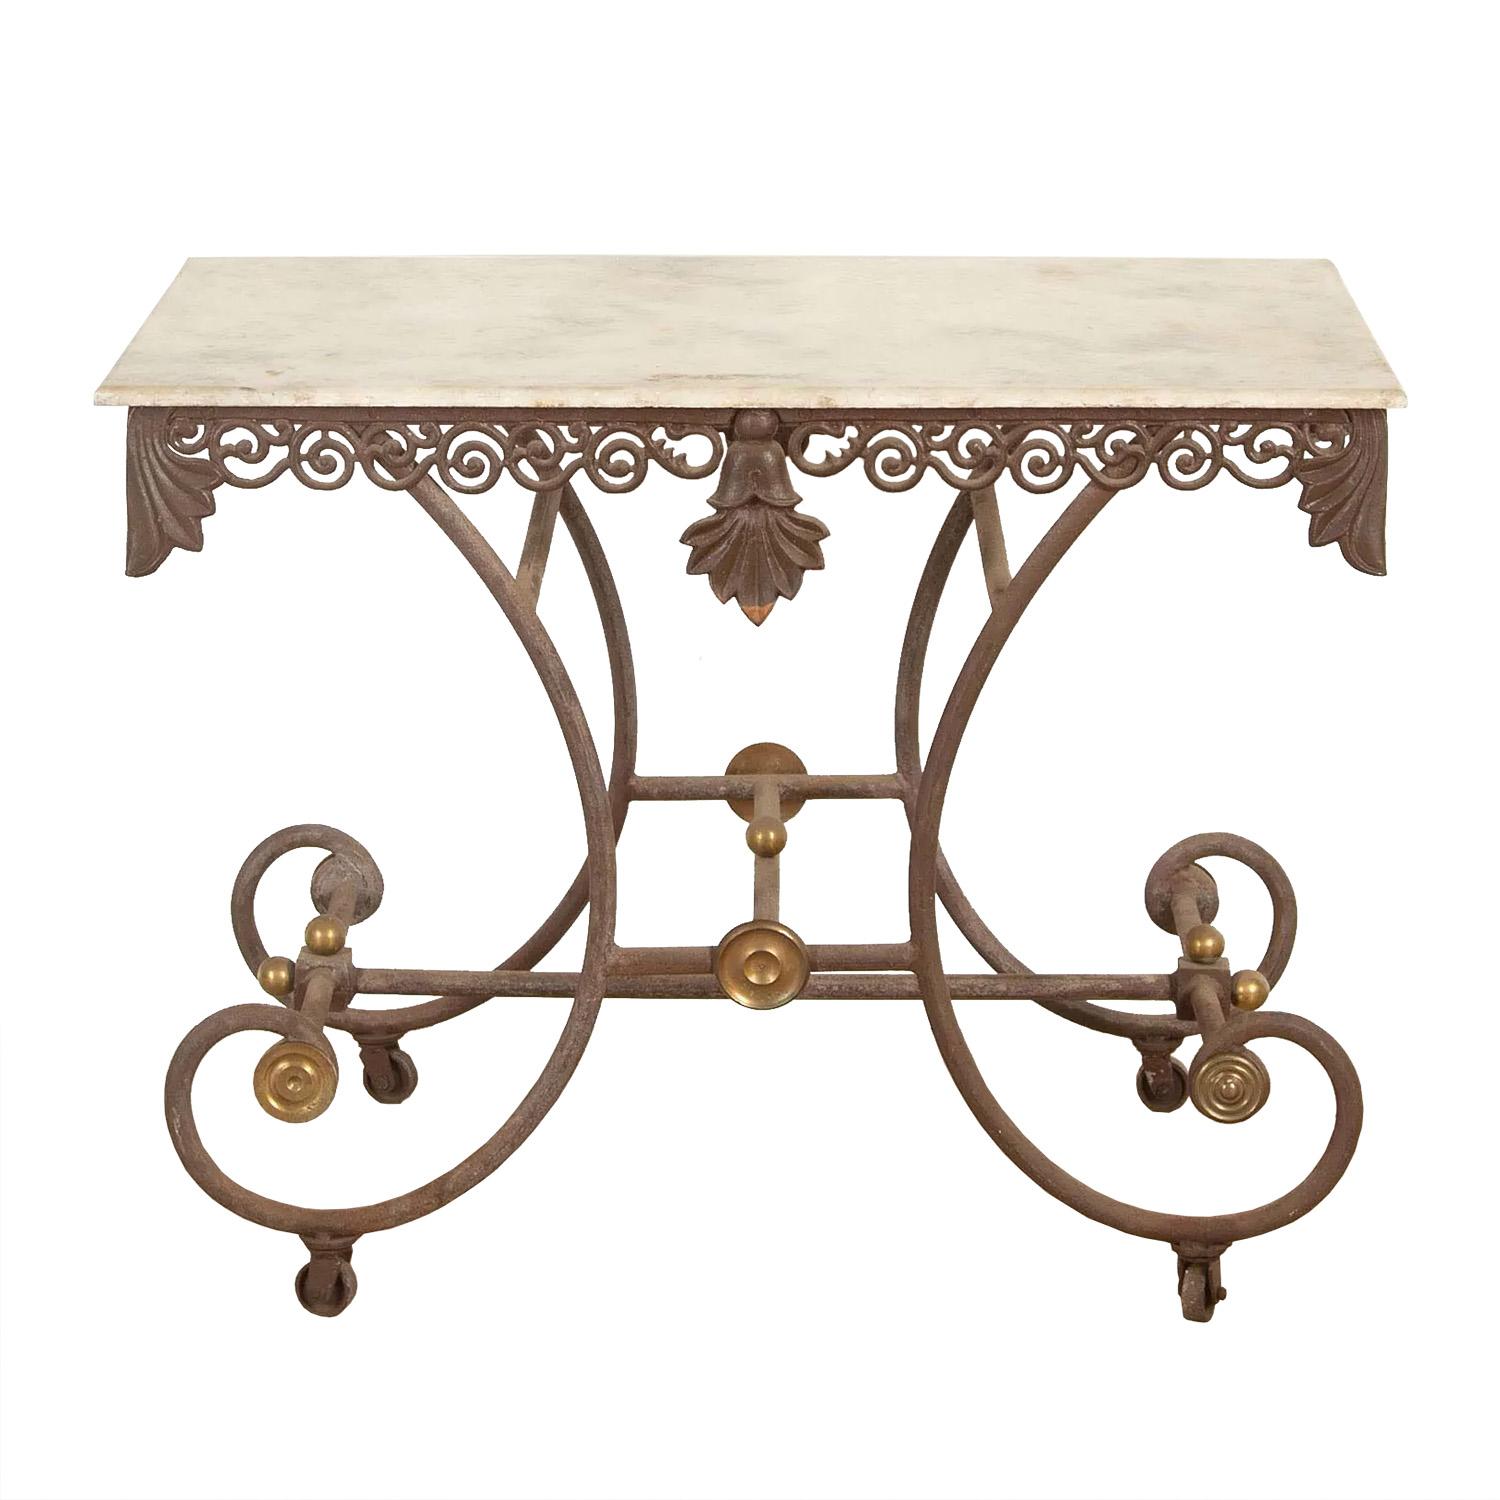 19th century patisserie table with a decorative design border scrolled border featuring an acanthus leaf decoration to the corners and centre. This piece has a good time worn patina and original marble.